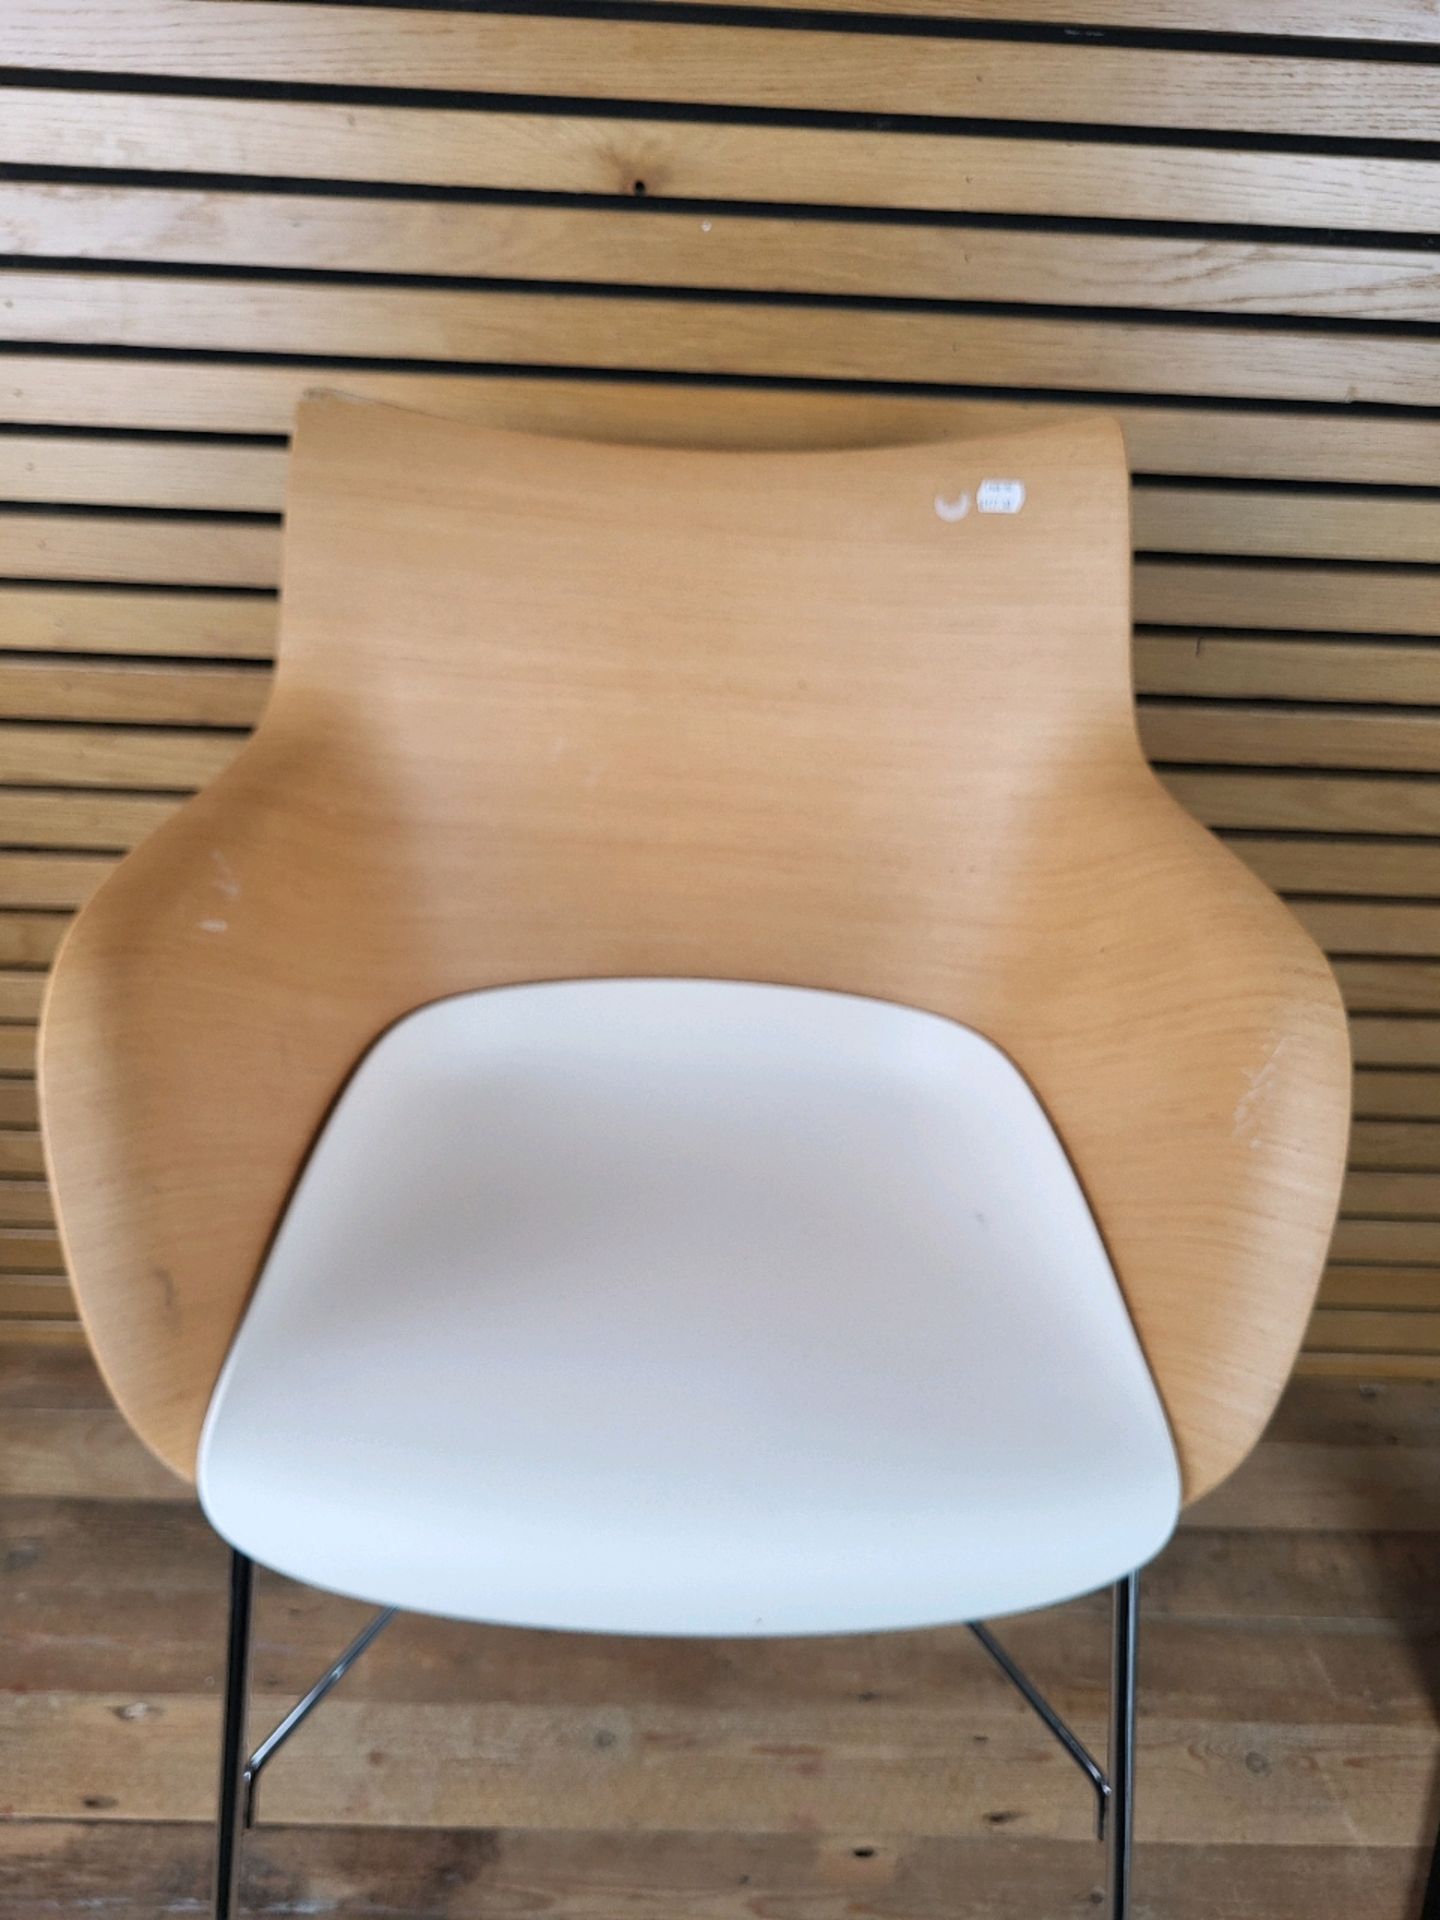 Kartell Q/Wood Arm Chair Designed By Philippe Starck - Image 2 of 4